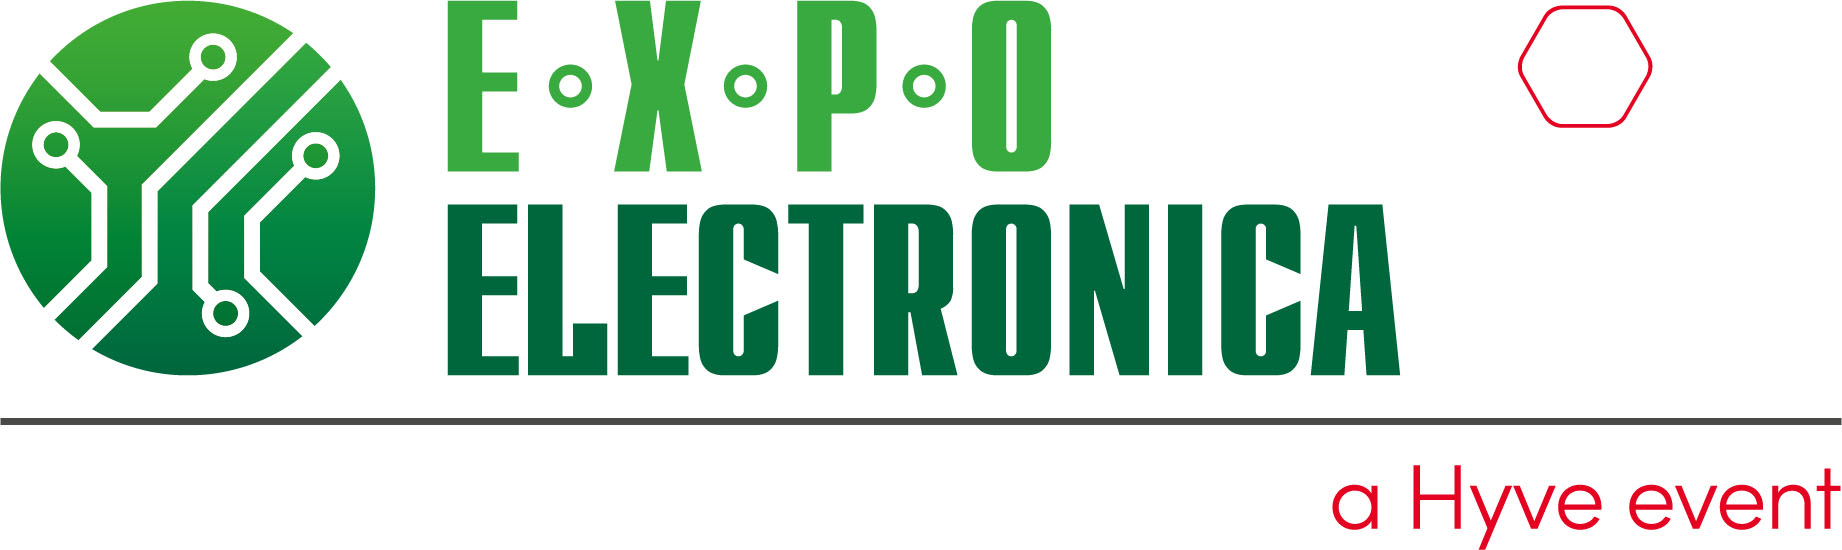 expoelectronica h red